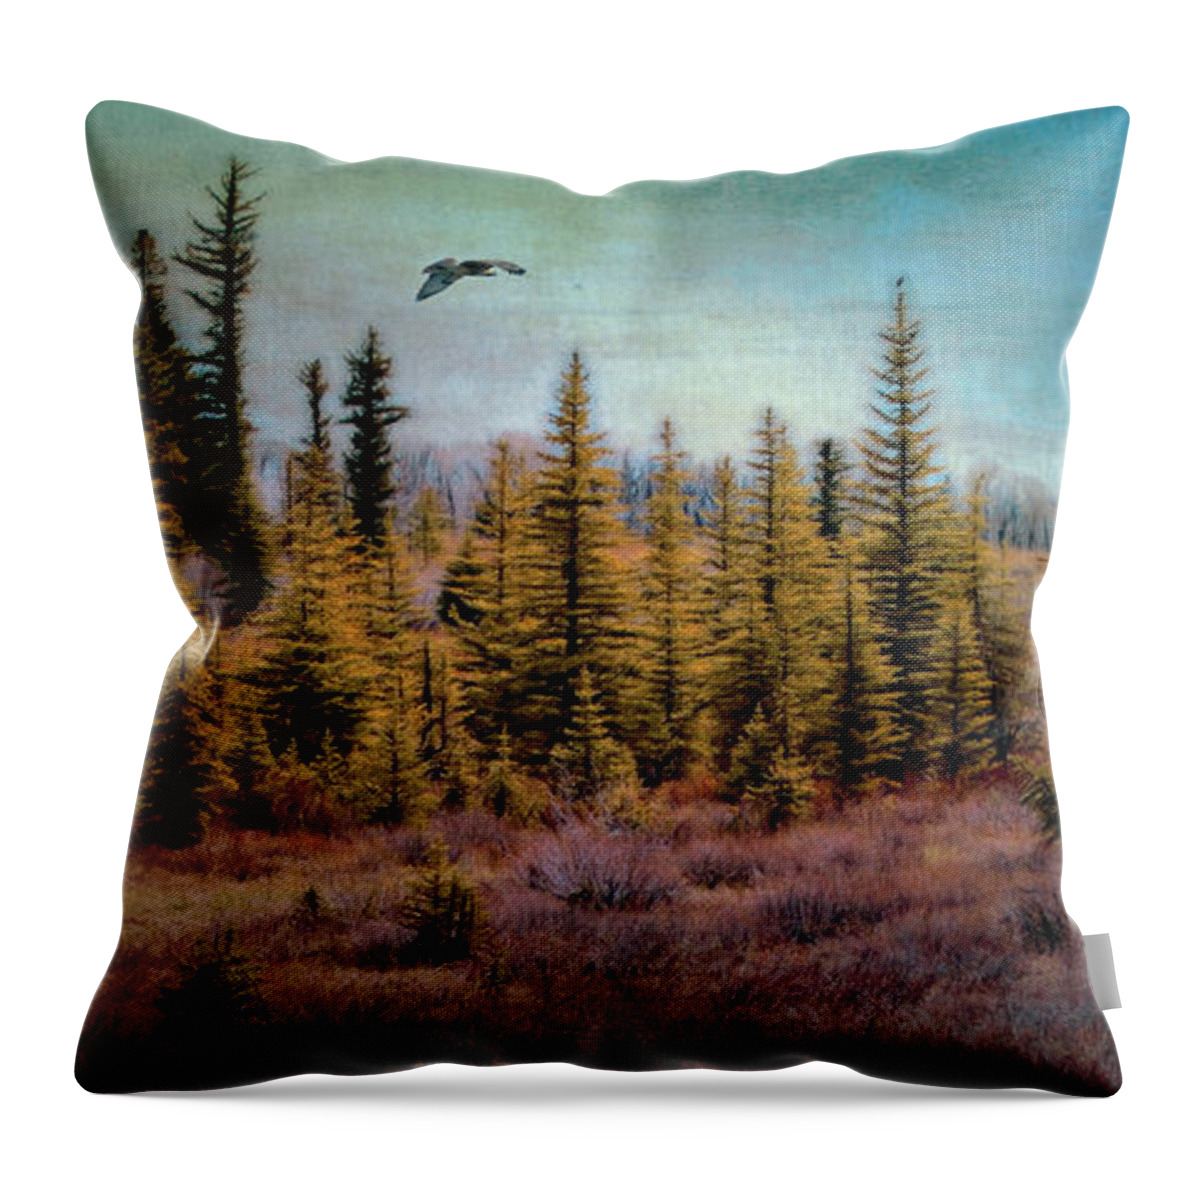 Pine Throw Pillow featuring the photograph Digitally Painted Textured Pine Hawk Flyover by Clare VanderVeen